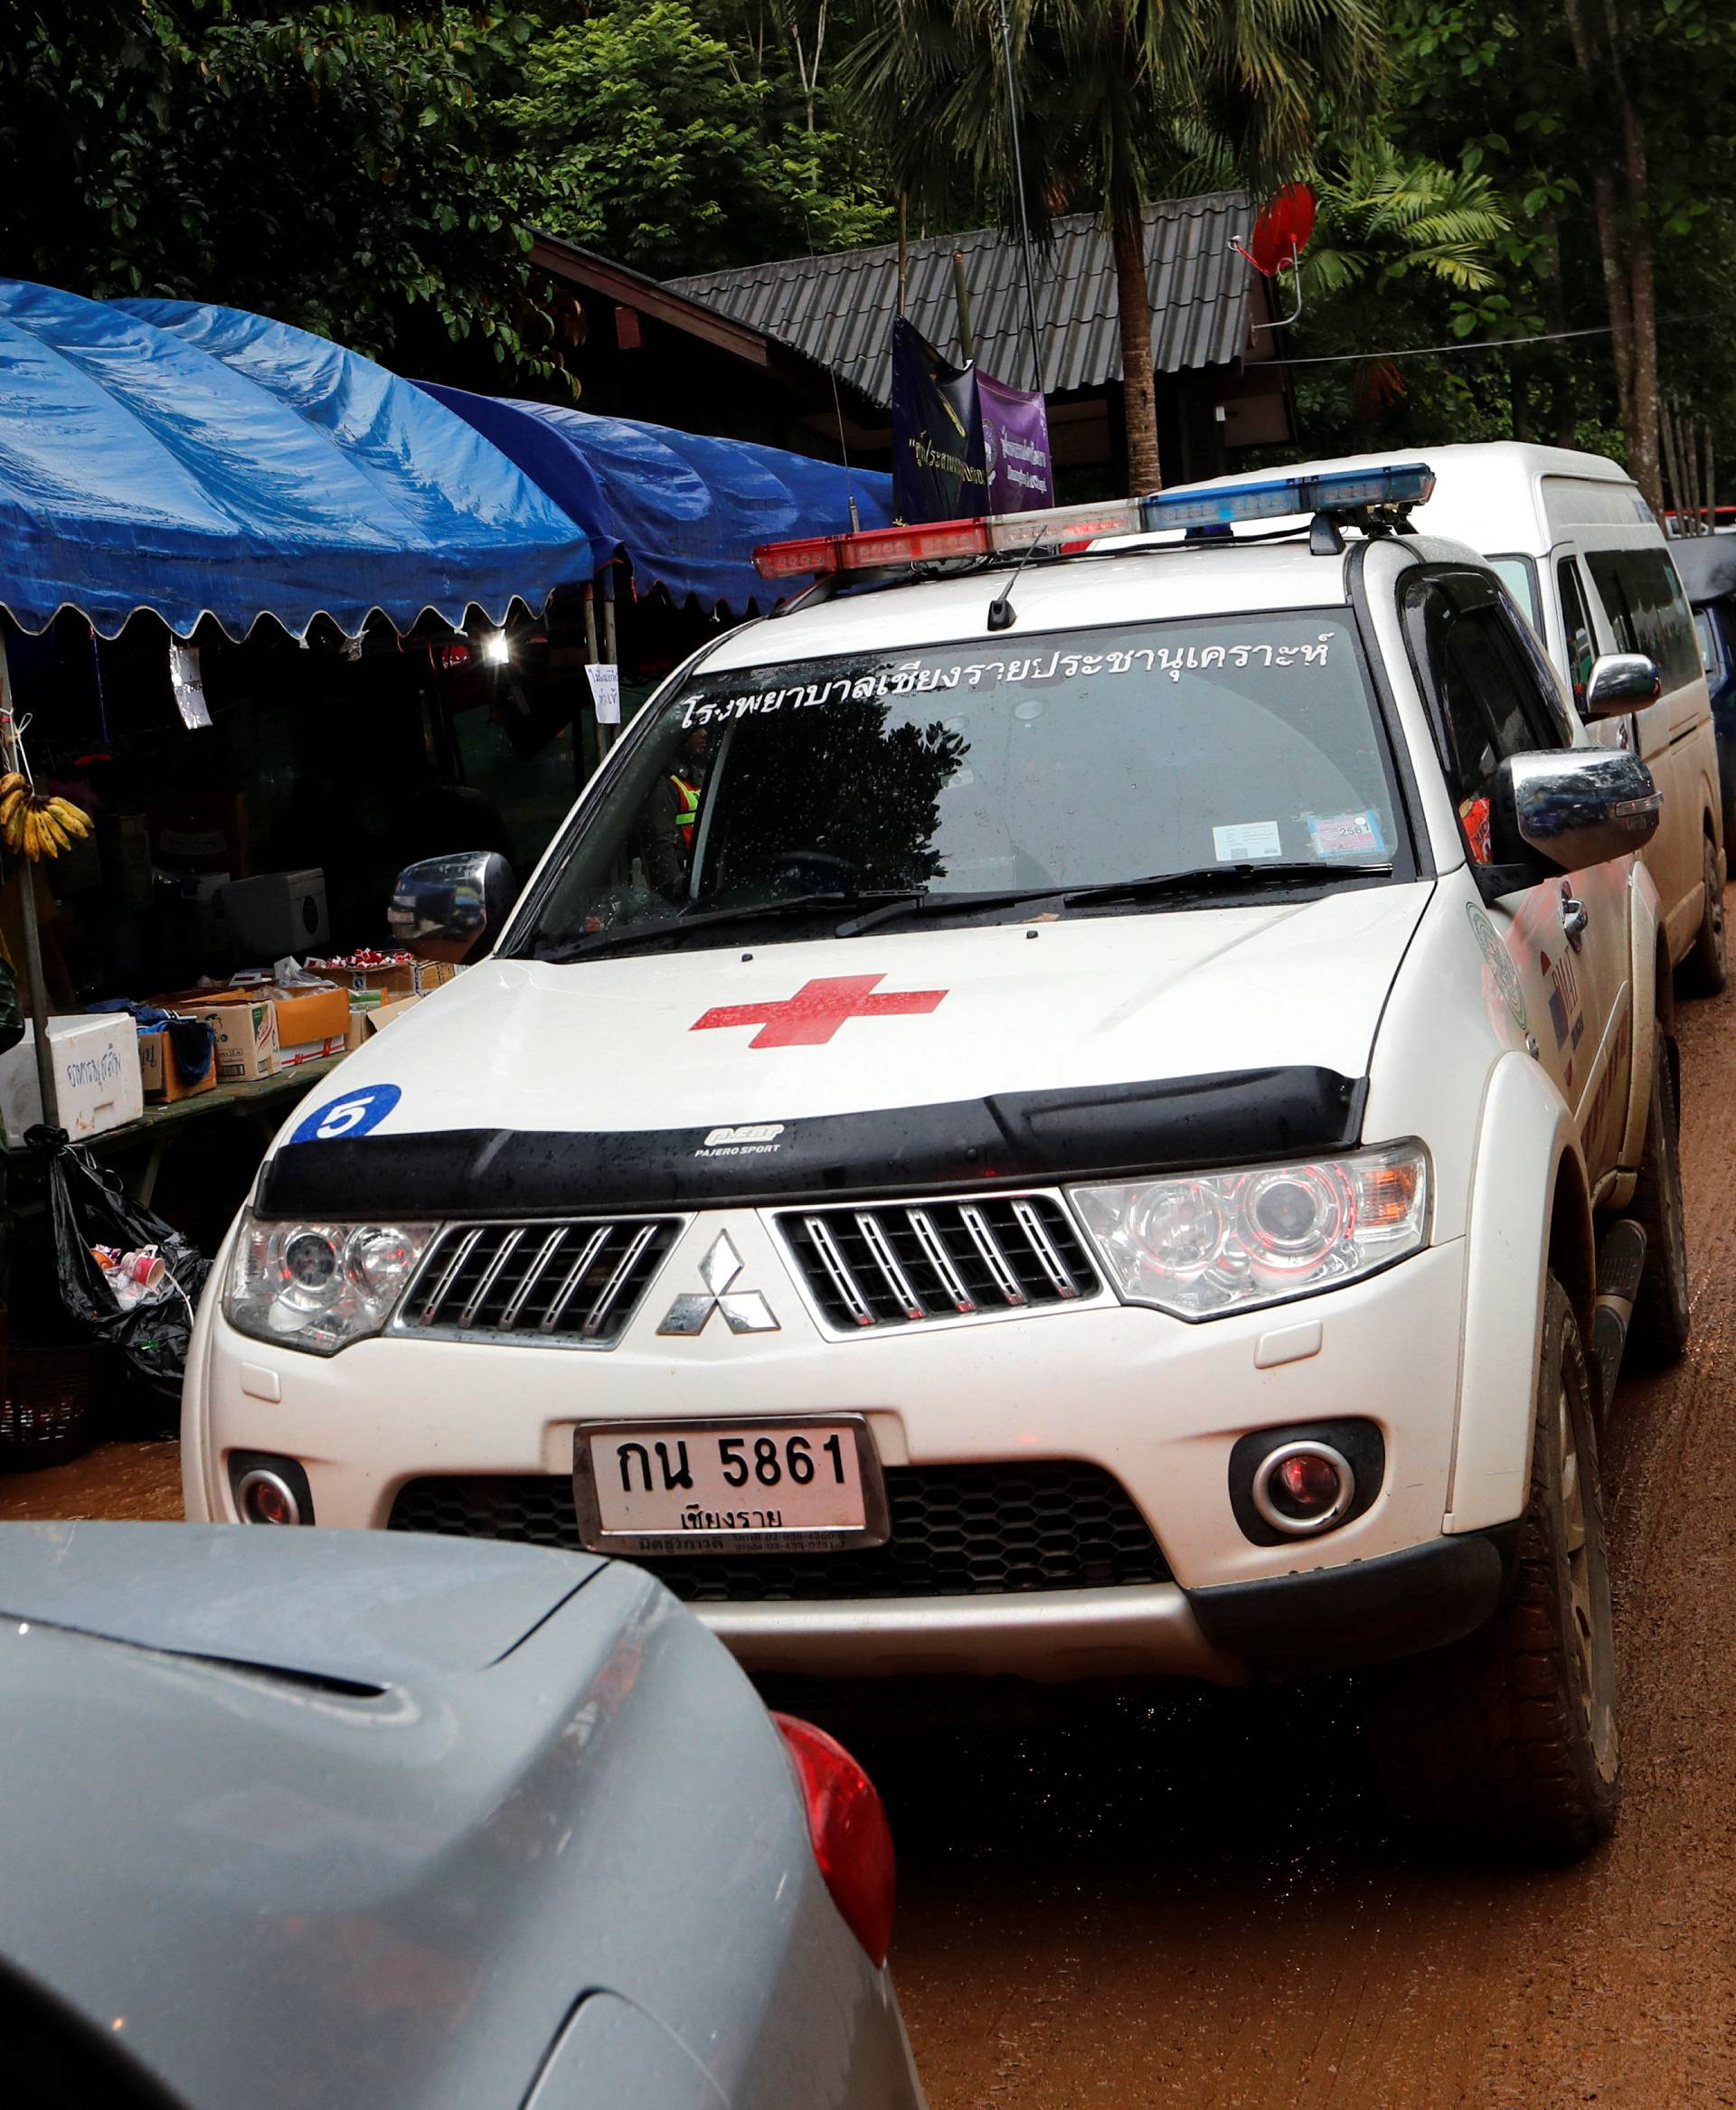 Ambulance is seen outside the Tham Luang cave complex after Thailand's government instructed members of the media to move out urgently, in the northern province of Chiang Rai